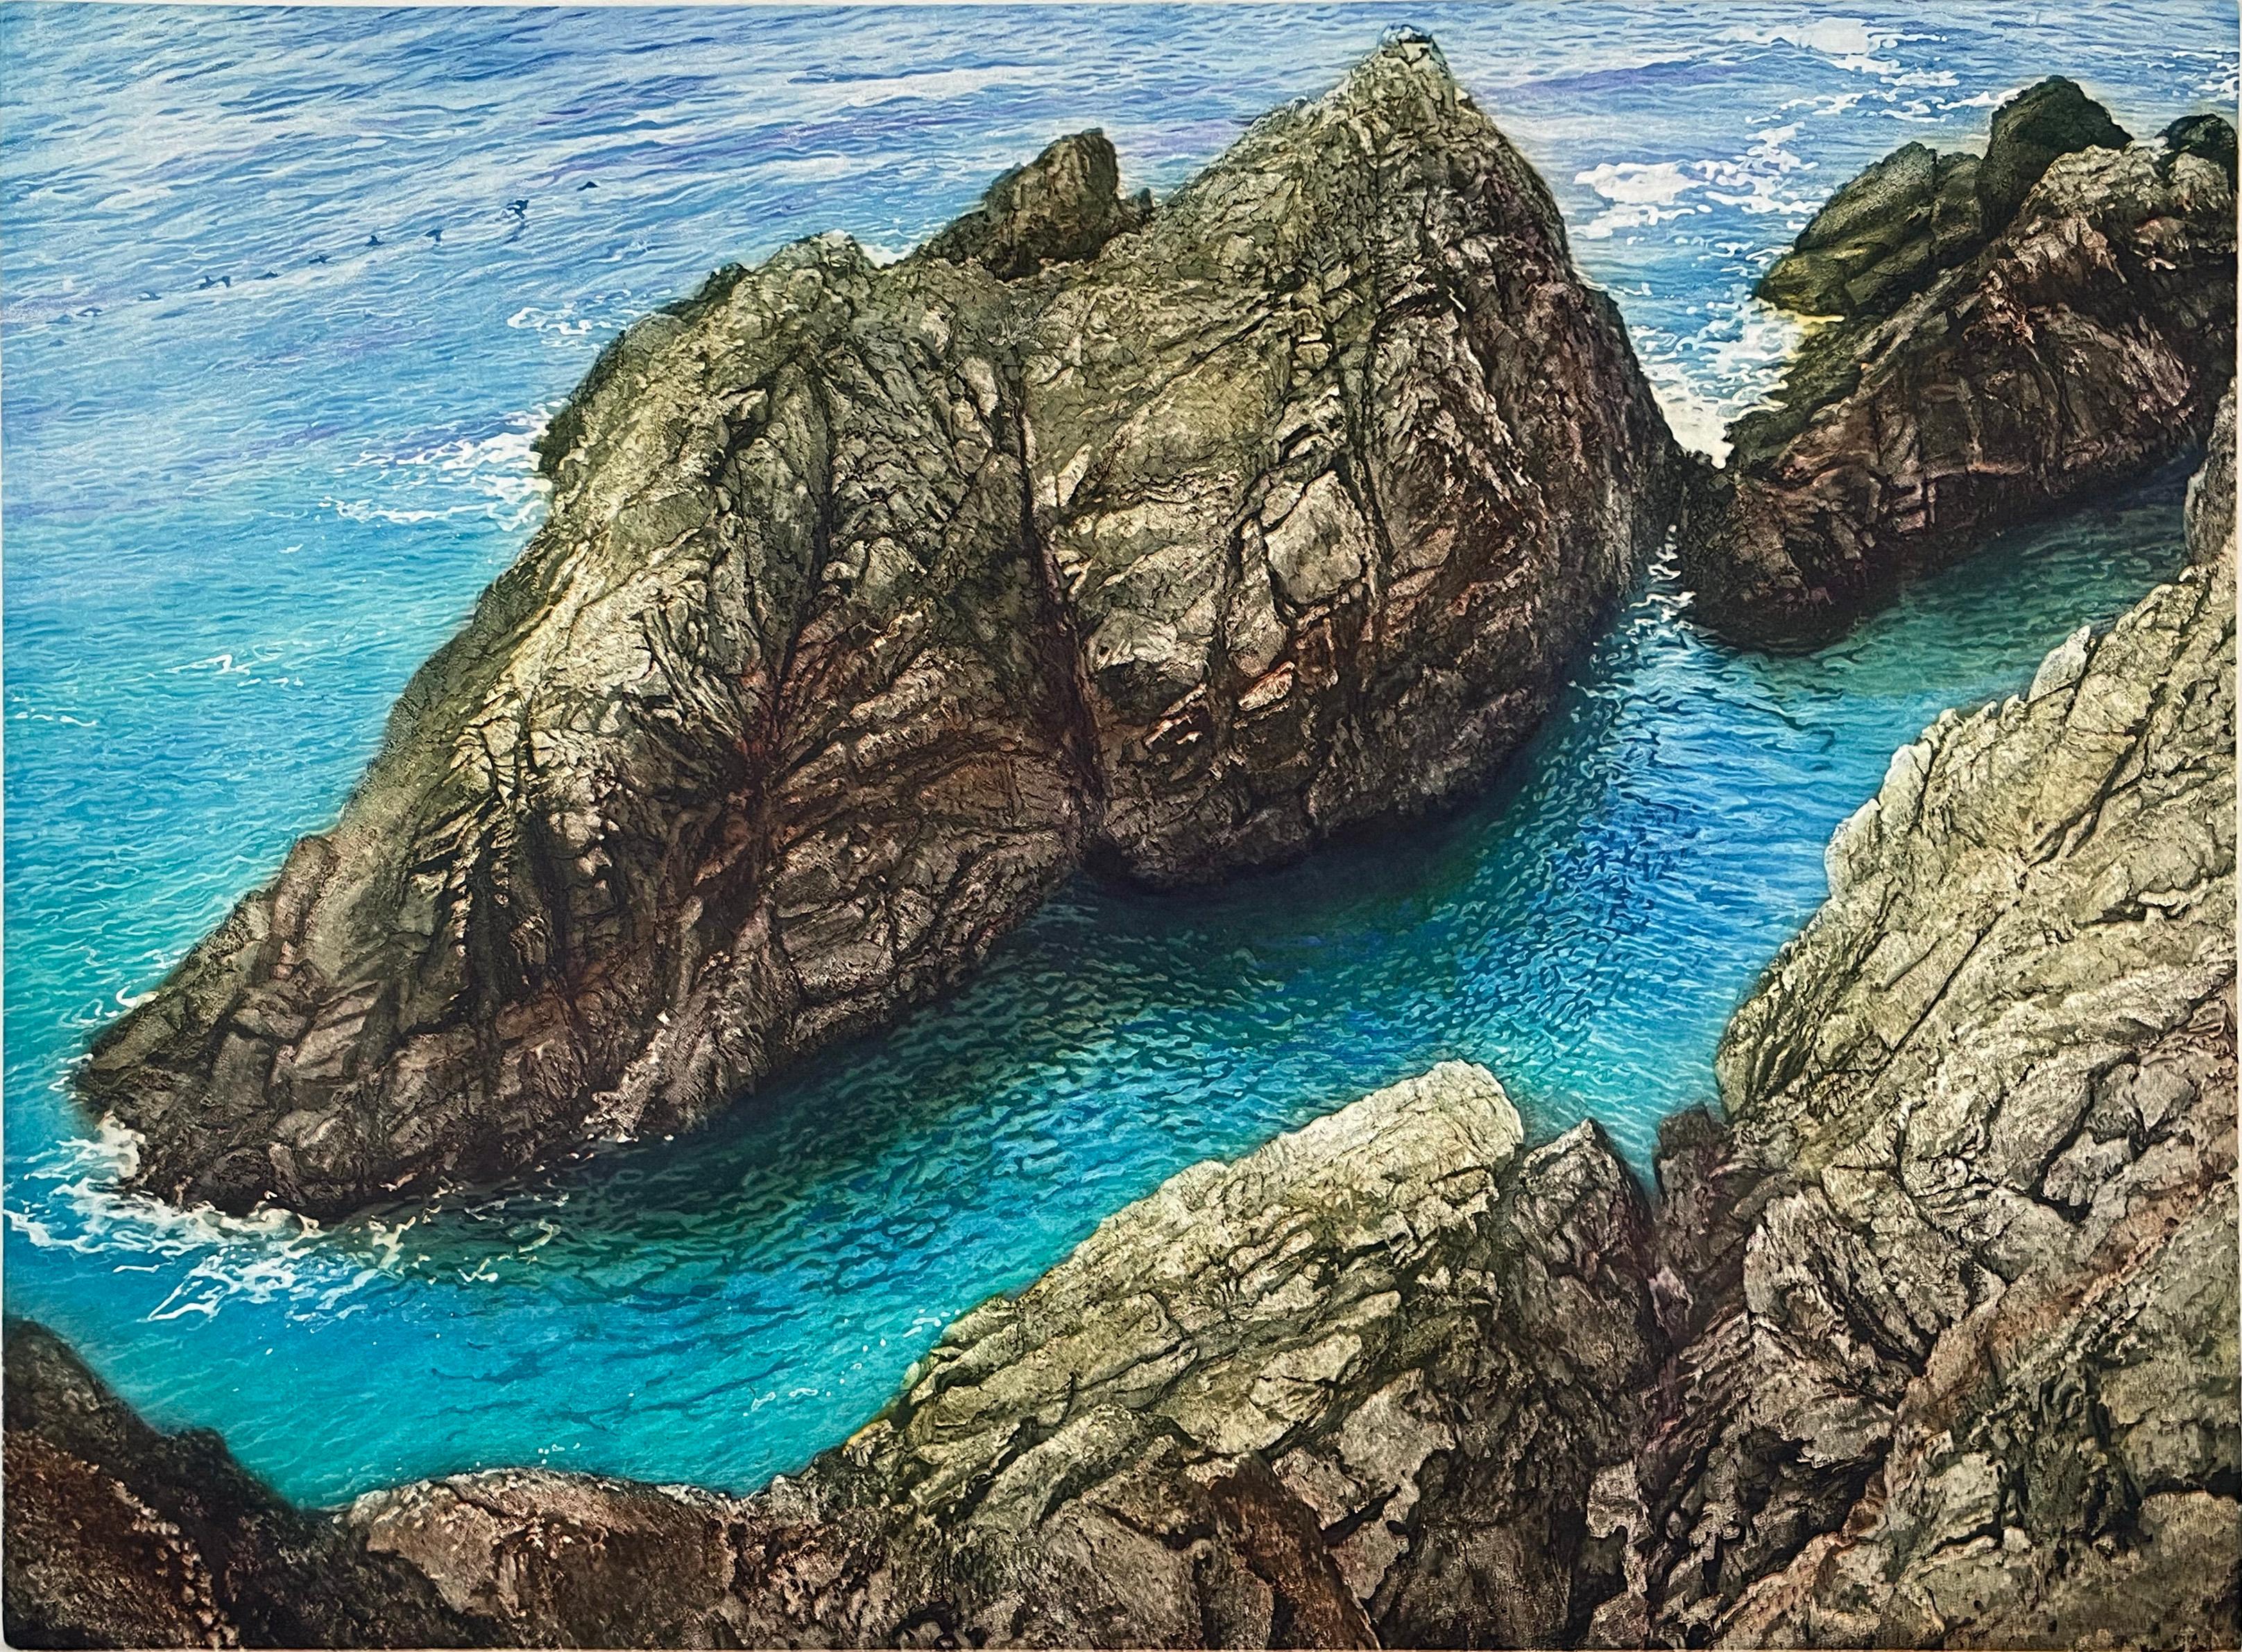 Medium: Etching w/ Aquatint
Year: 2033
Edition: 20
Image Size: 24 x 32 inches

Rocky outcroppings off the California coastline. 

Werger has received over 250 awards in national and international exhibitions. In 2015 he recieved the Guanlan